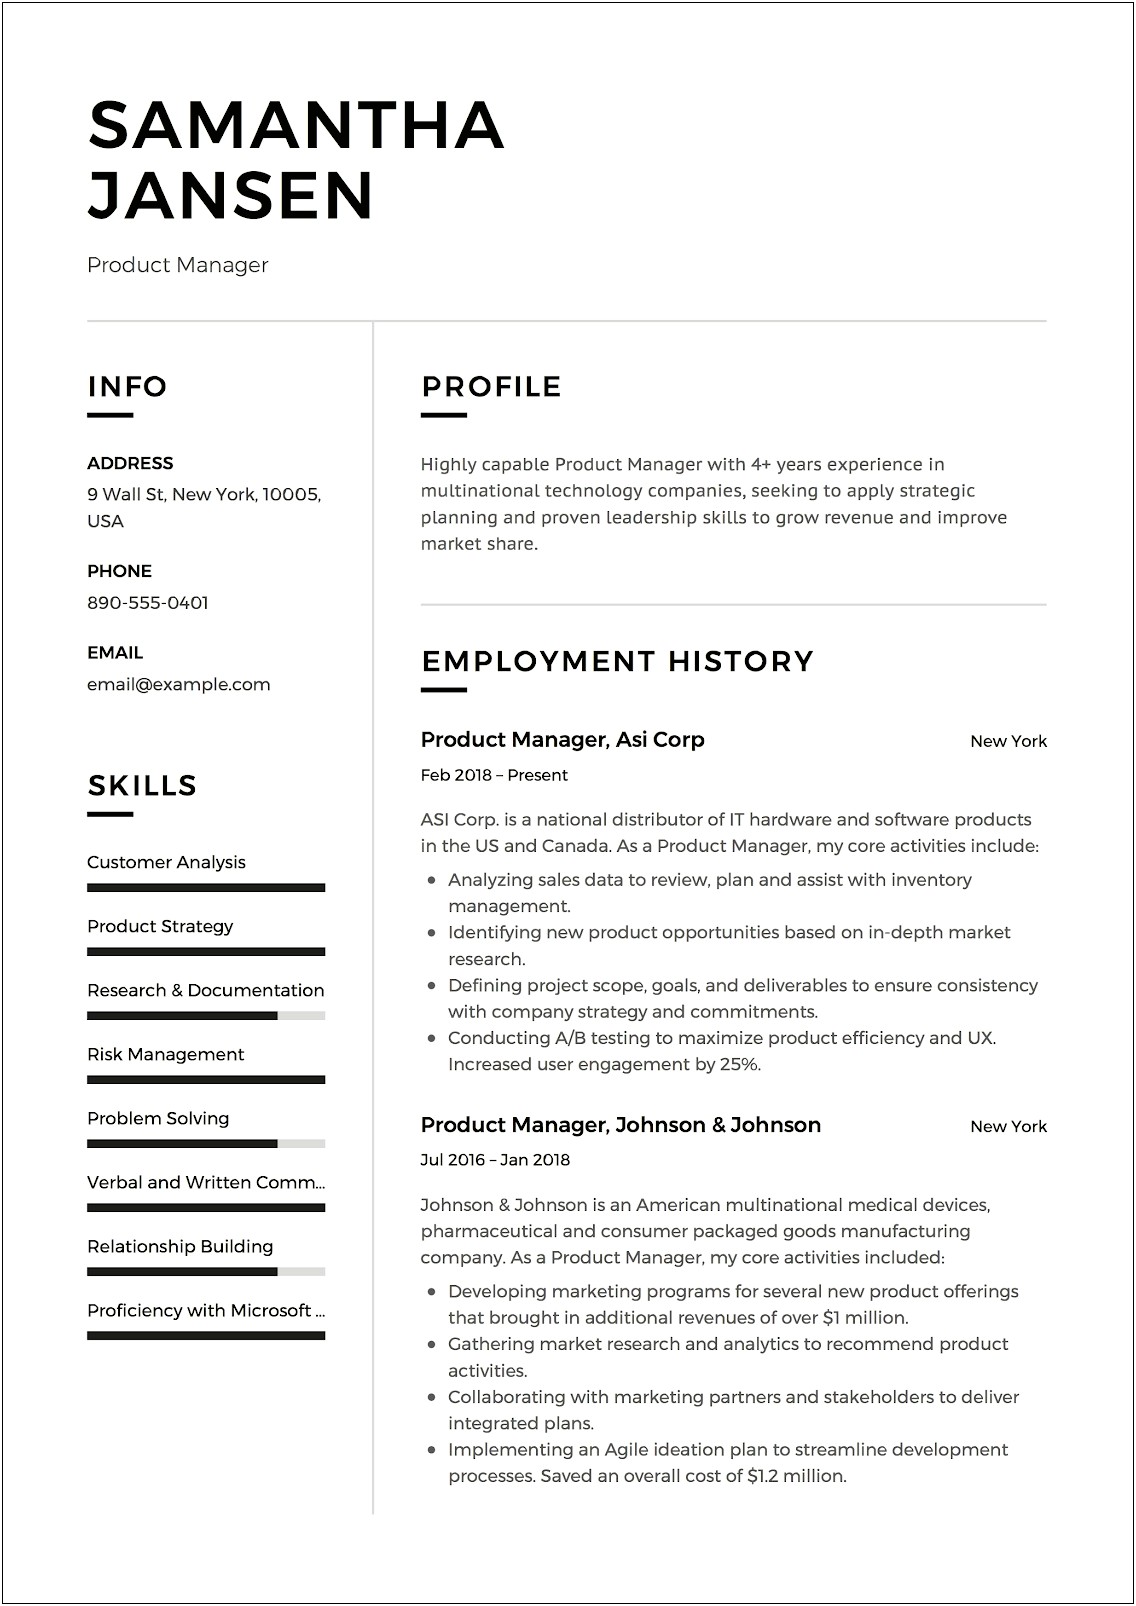 Good Things To Say About Goals On Resume